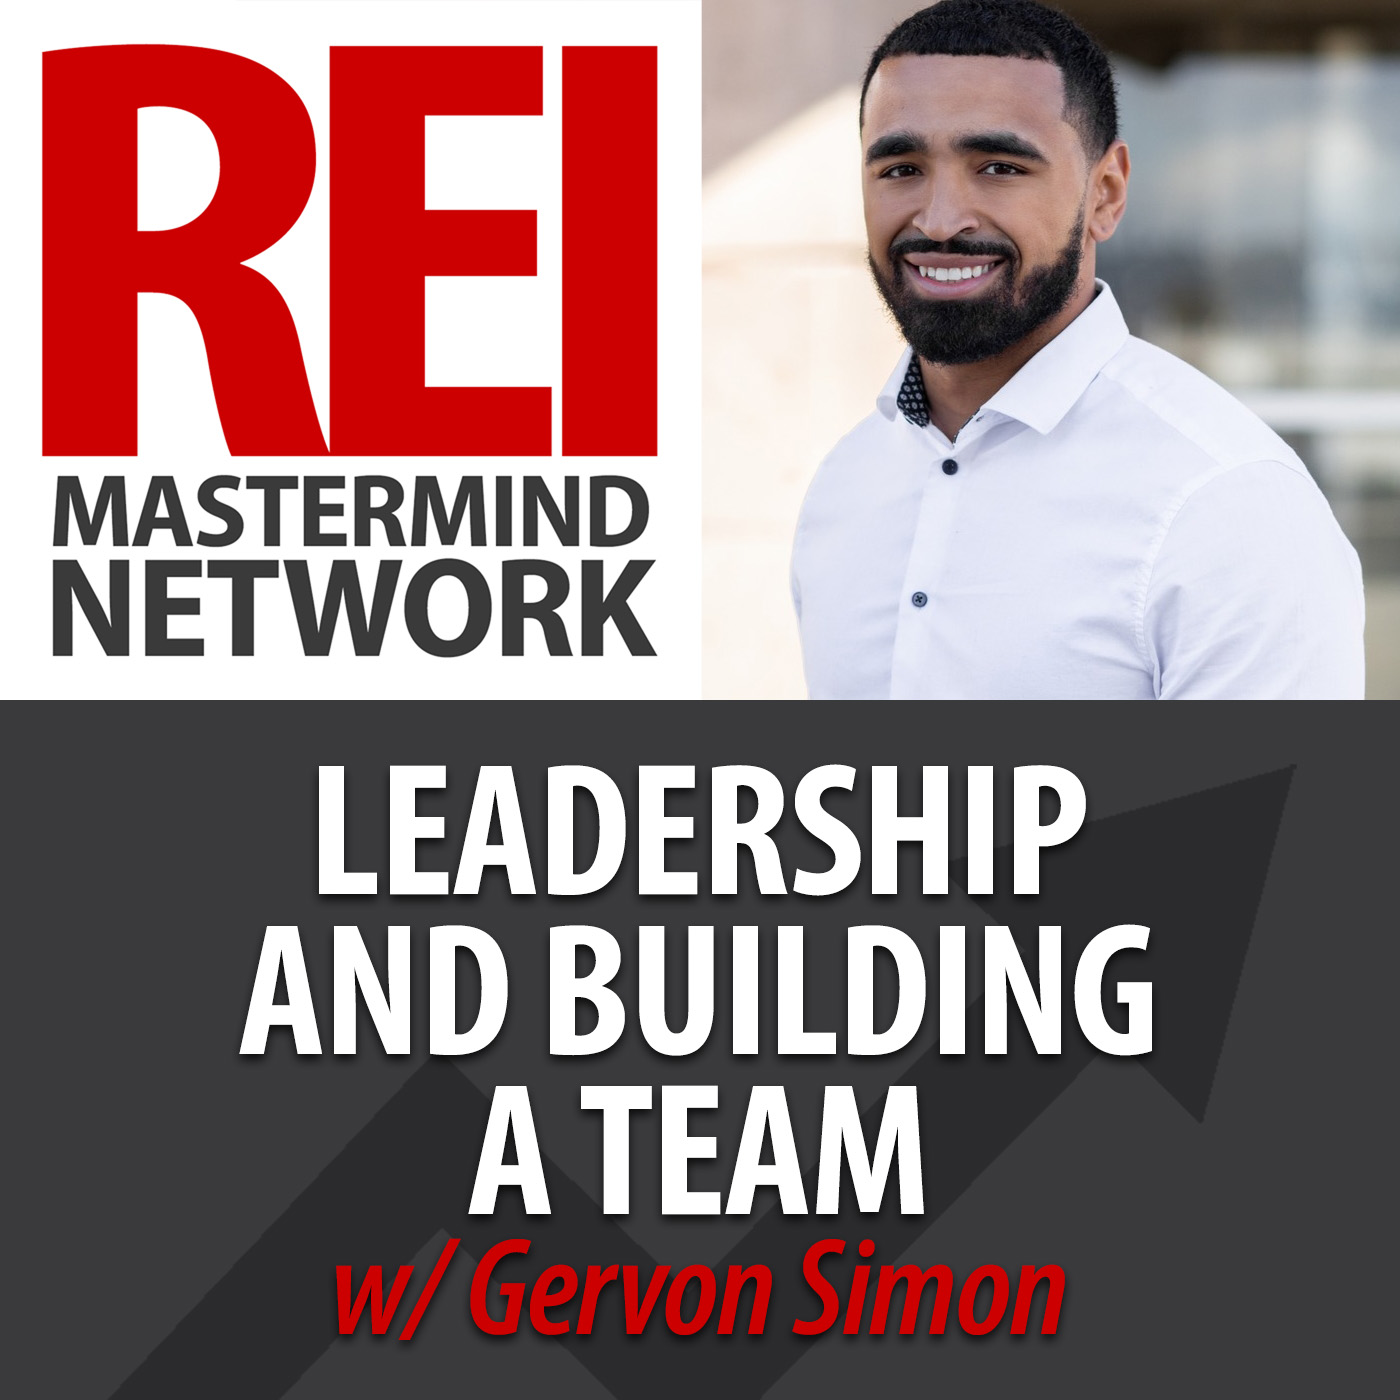 Gervon Simon: From West Point to Real Estate Success - Team Leadership and Development